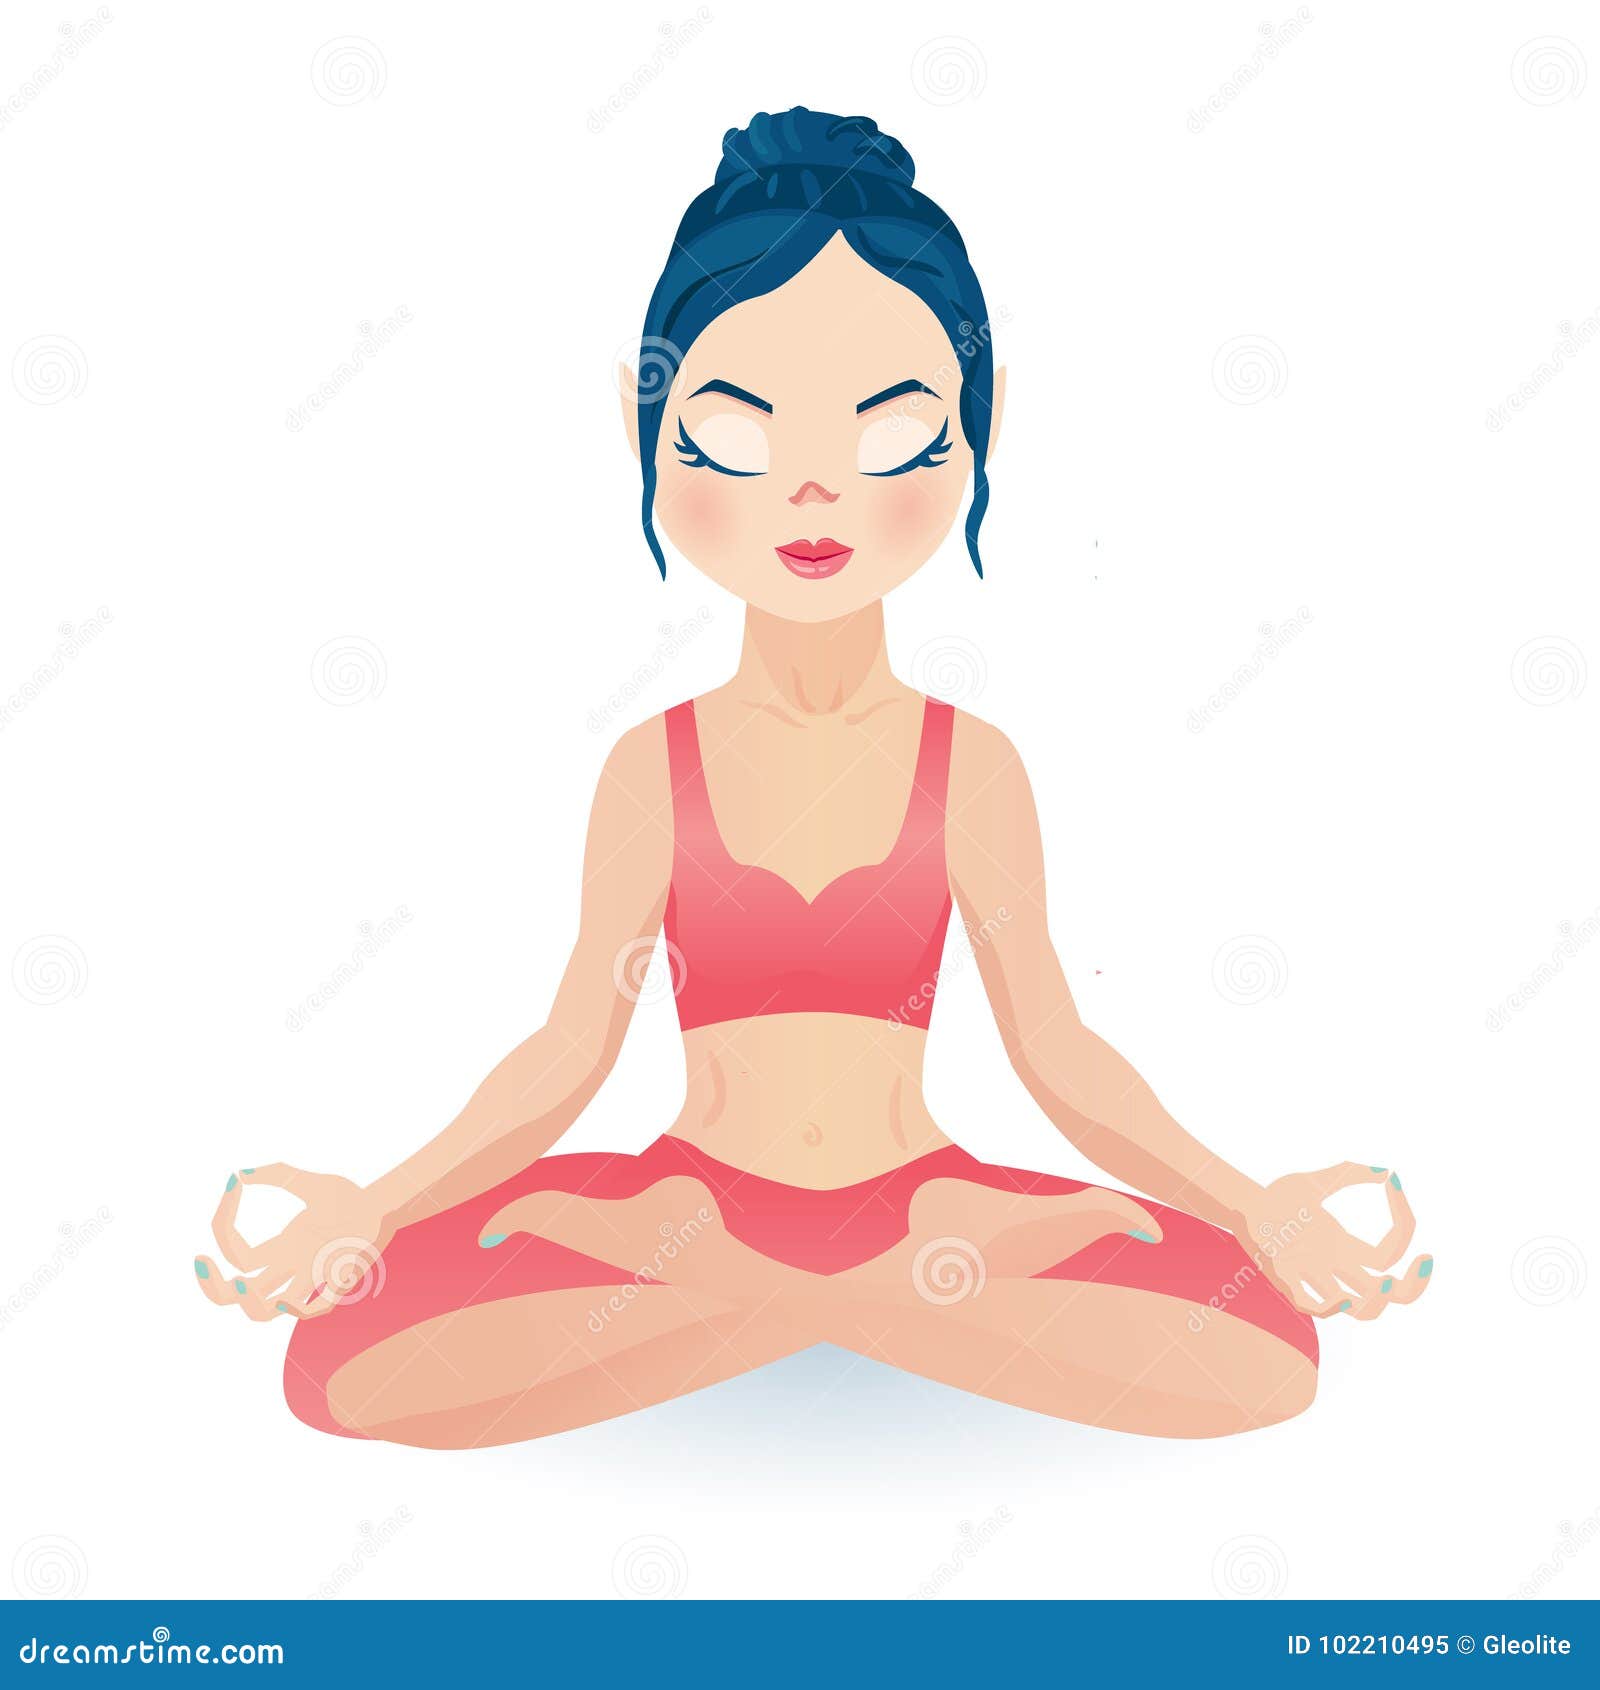 Woman In Lotus Position - Woman meditating in lotus position, minimalist  style - CleanPNG / KissPNG